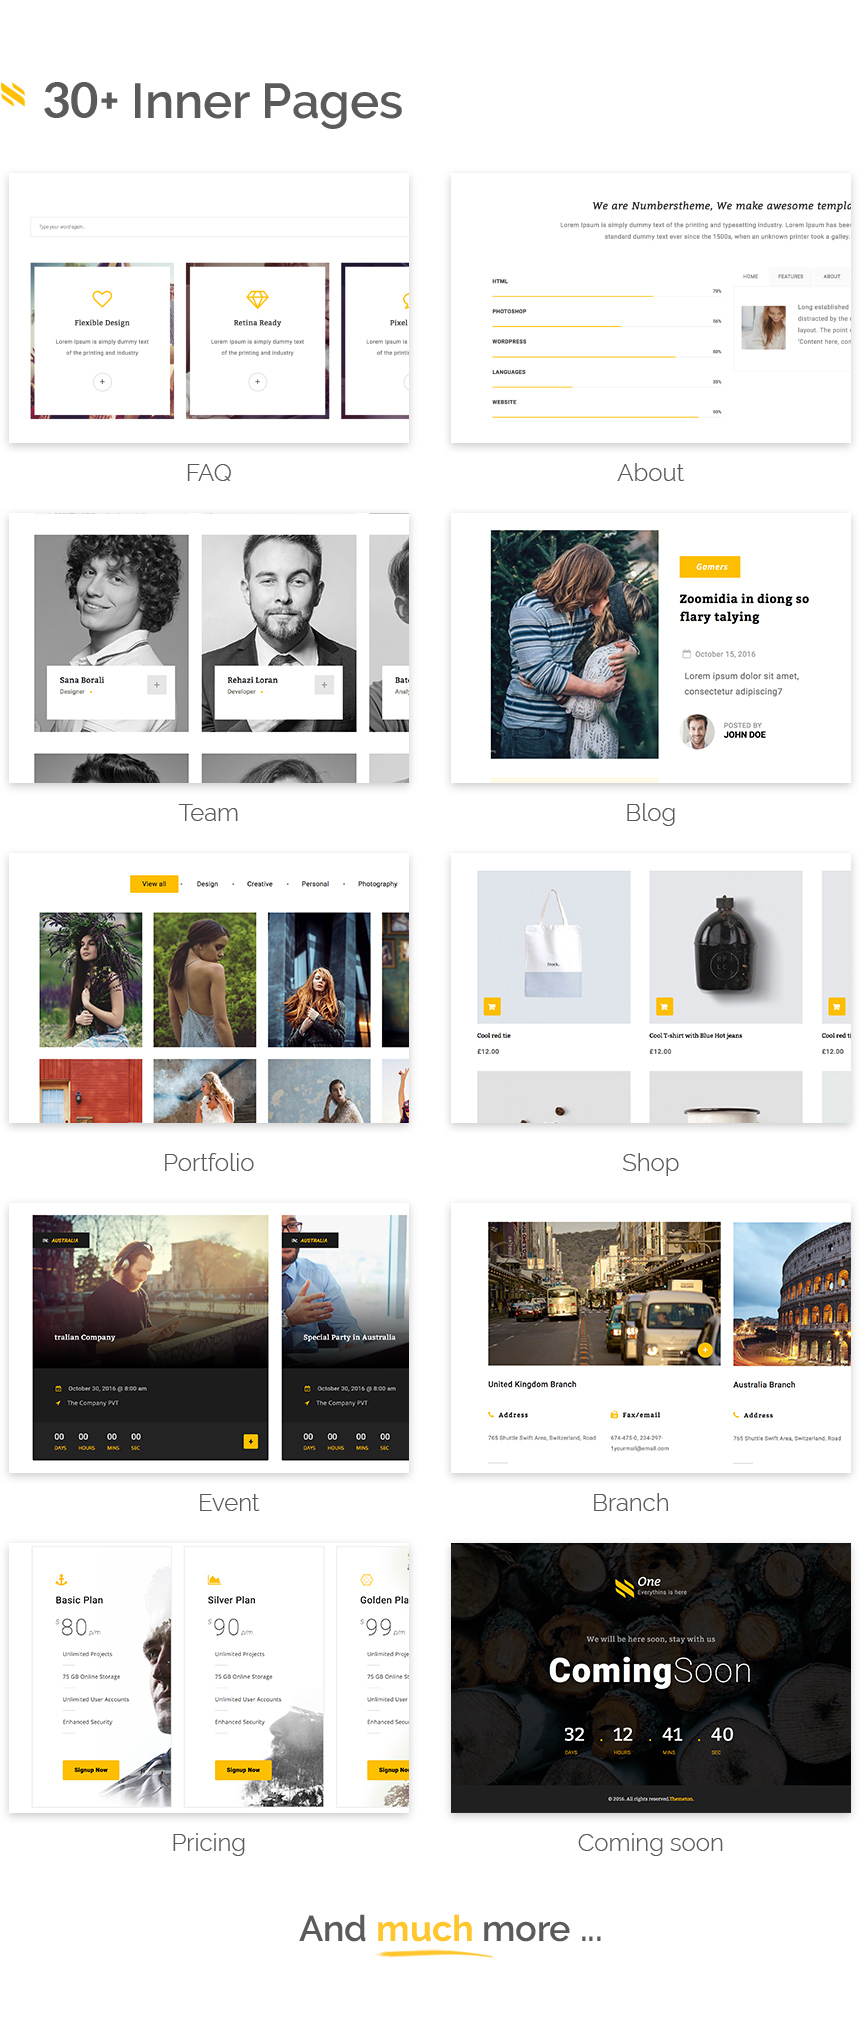 One – Business Agency Events WooCommerce Theme